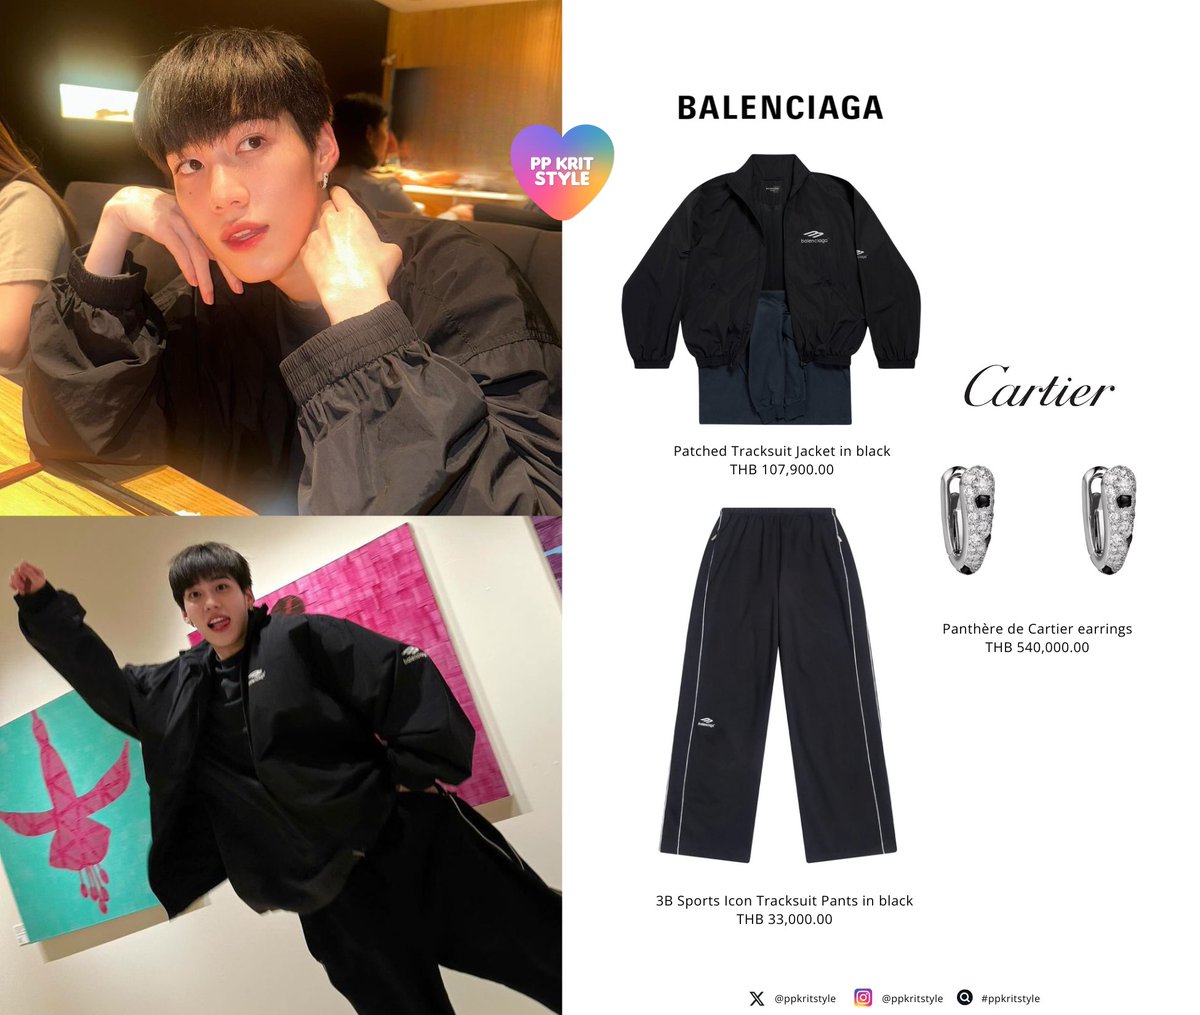 PP KRIT STYLE : Instagram Update 🍤

#Balenciaga Patched Tracksuit Jacket and 3B Sports Icon Tracksuit Pants
#Cartier Panthère de Cartier earrings 

#ppkritt #ppkritstyle